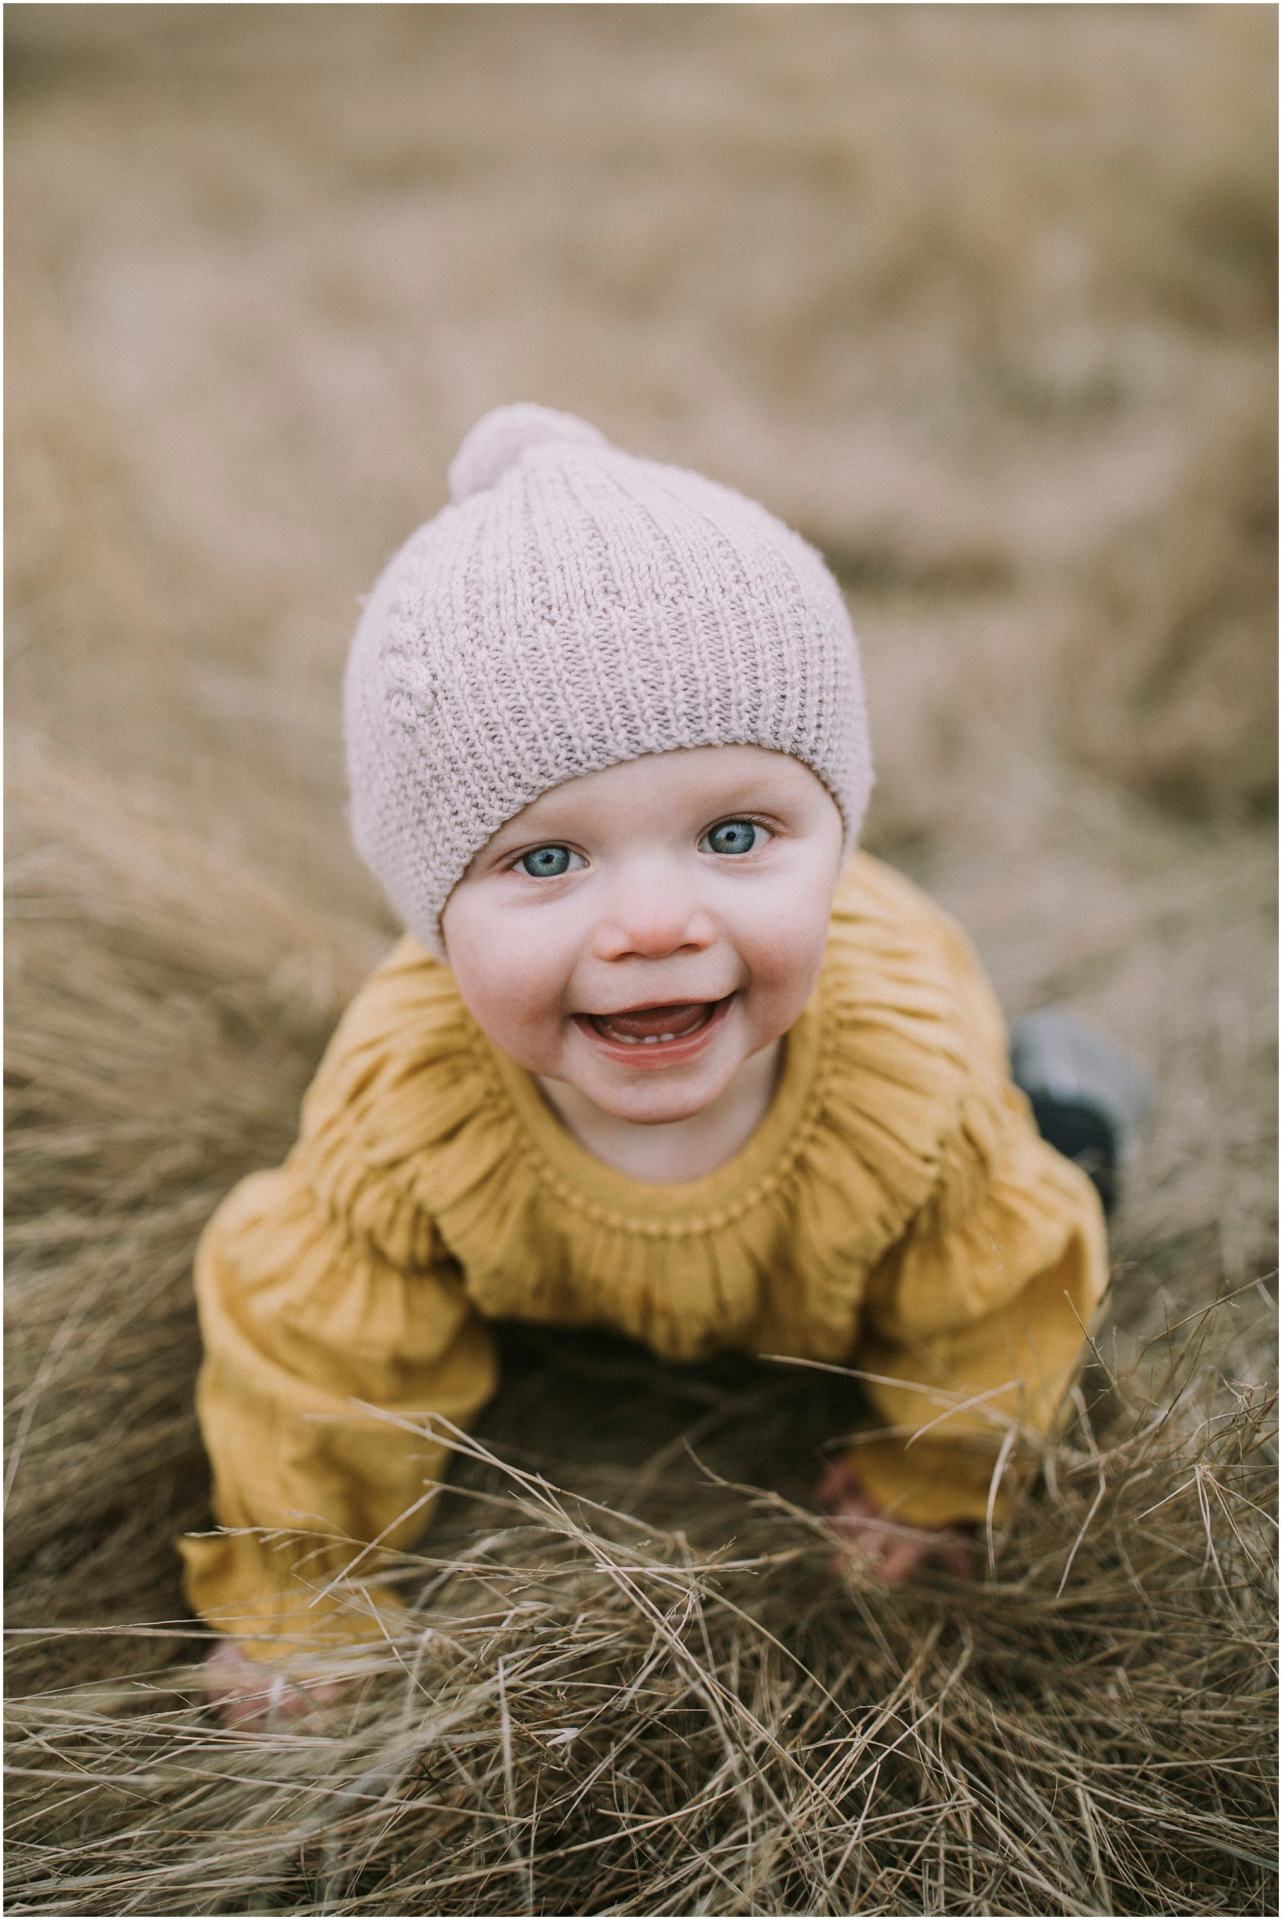 Charlotte Kiri Photography - Family Photography of a young child looking up happily as they crawl in the hay in Wanaka, New Zealand.